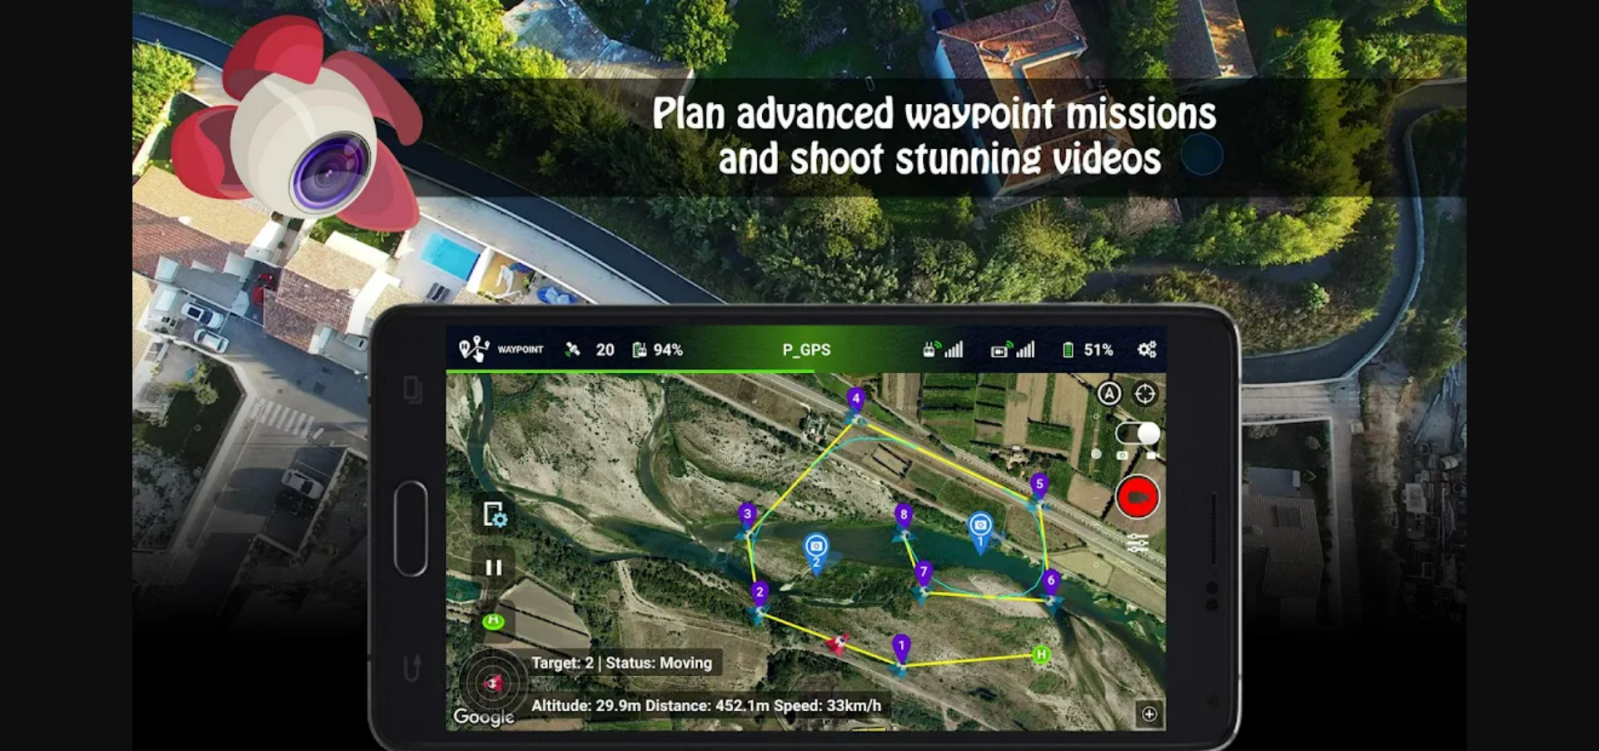 New Features For DJI Mini 2, Mini SE, And Air 2S With Mobile SDK